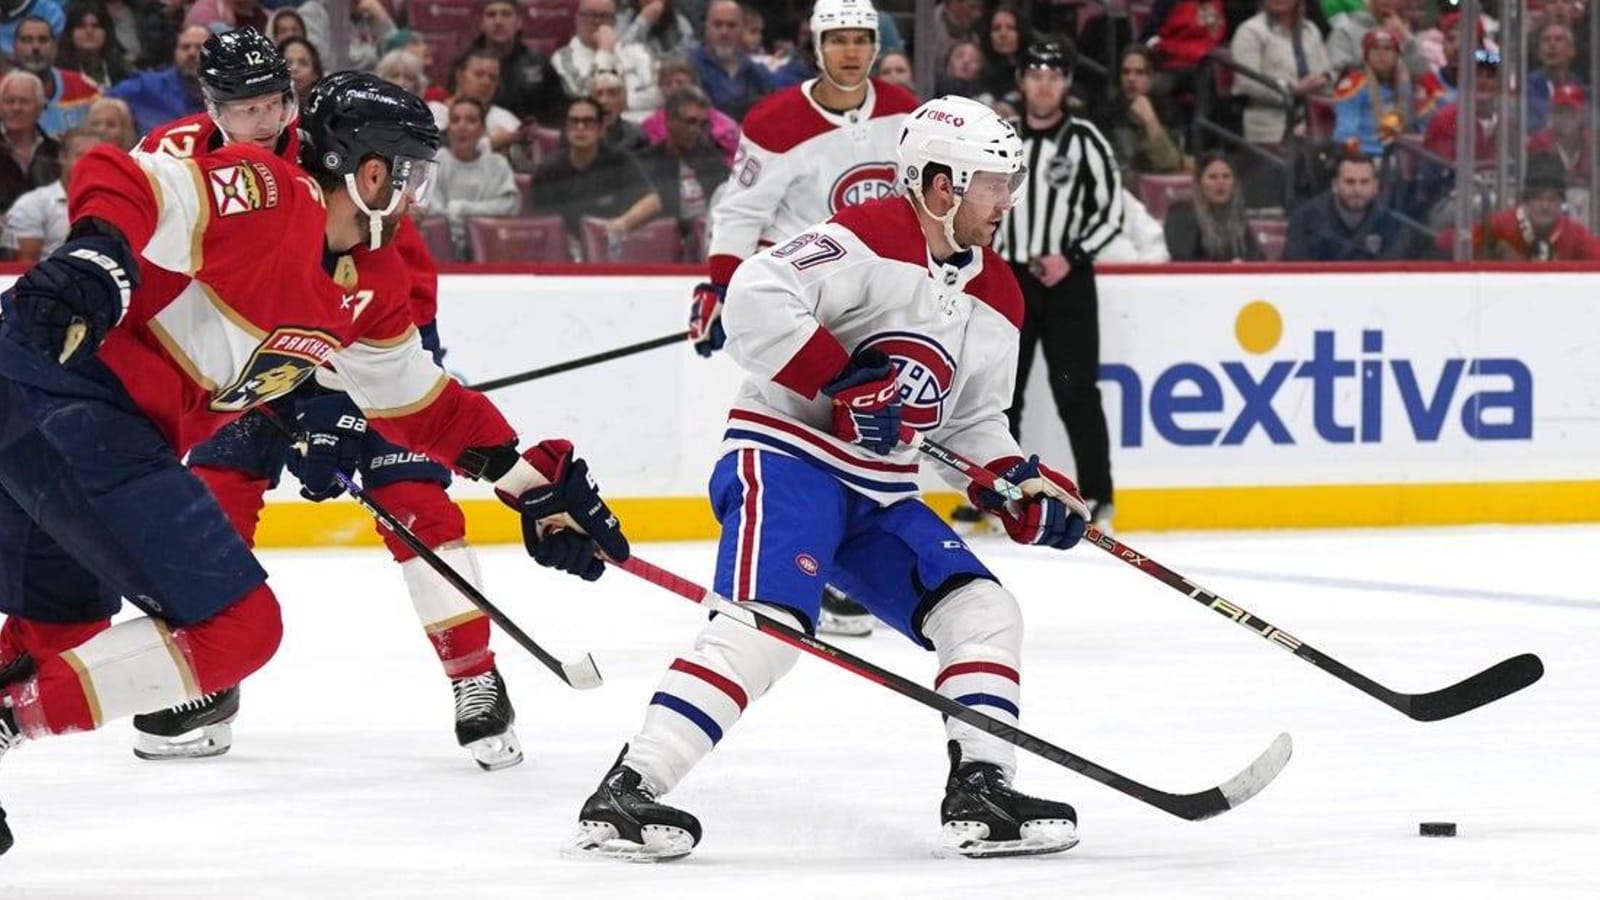 Florida Panthers at Montreal Canadiens prediction, pick for 3/30: Cats eye season sweep of Habs